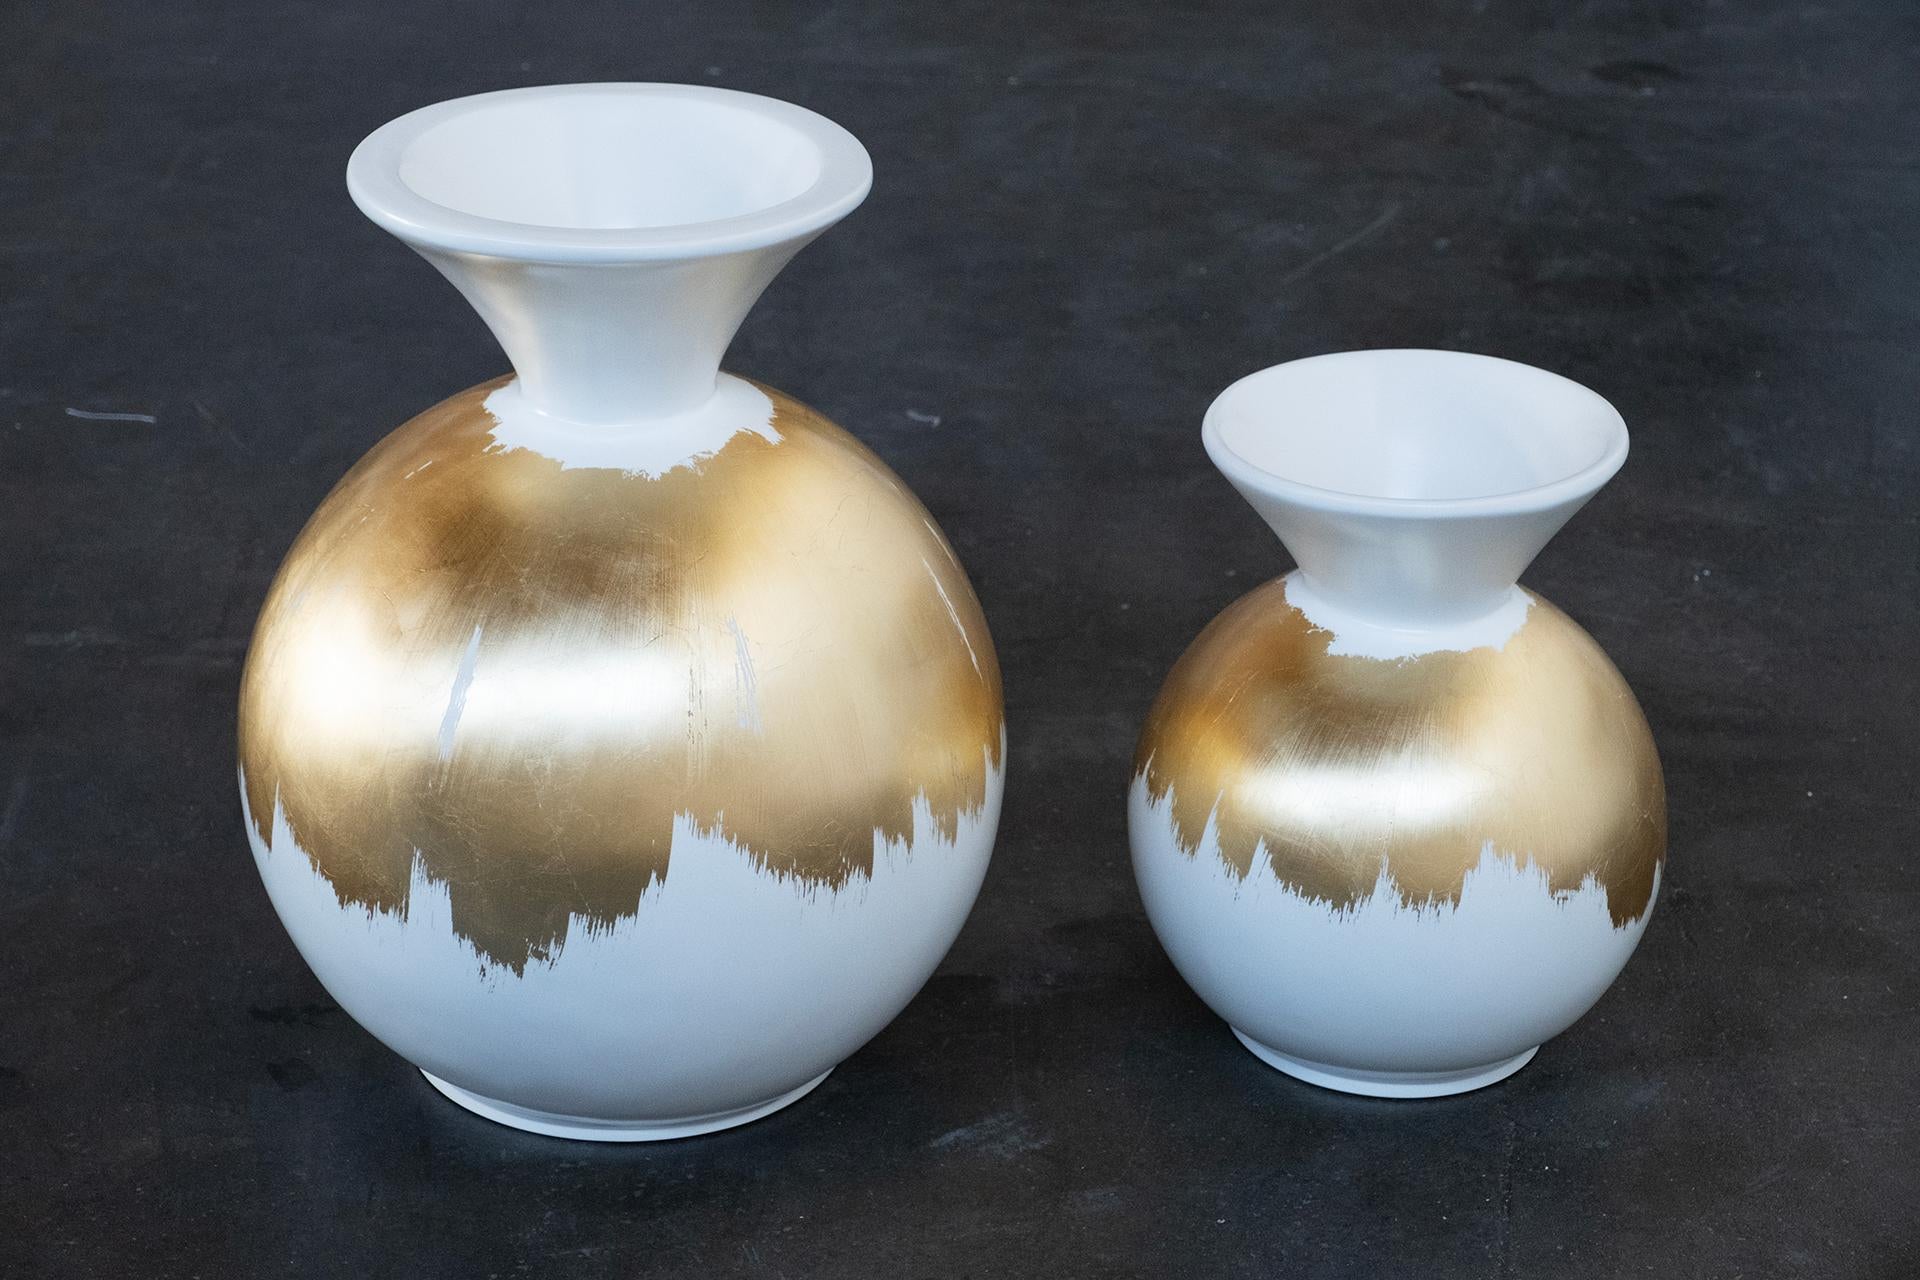 Resin Decorative Vase White Gold Leaf, Lusitanus Home Collection, Handcrafted in Portugal - Europe by Lusitanus Home.

This beautiful decorative vase is lacquered in white cotton lacquer and has details in gold leaf applied by